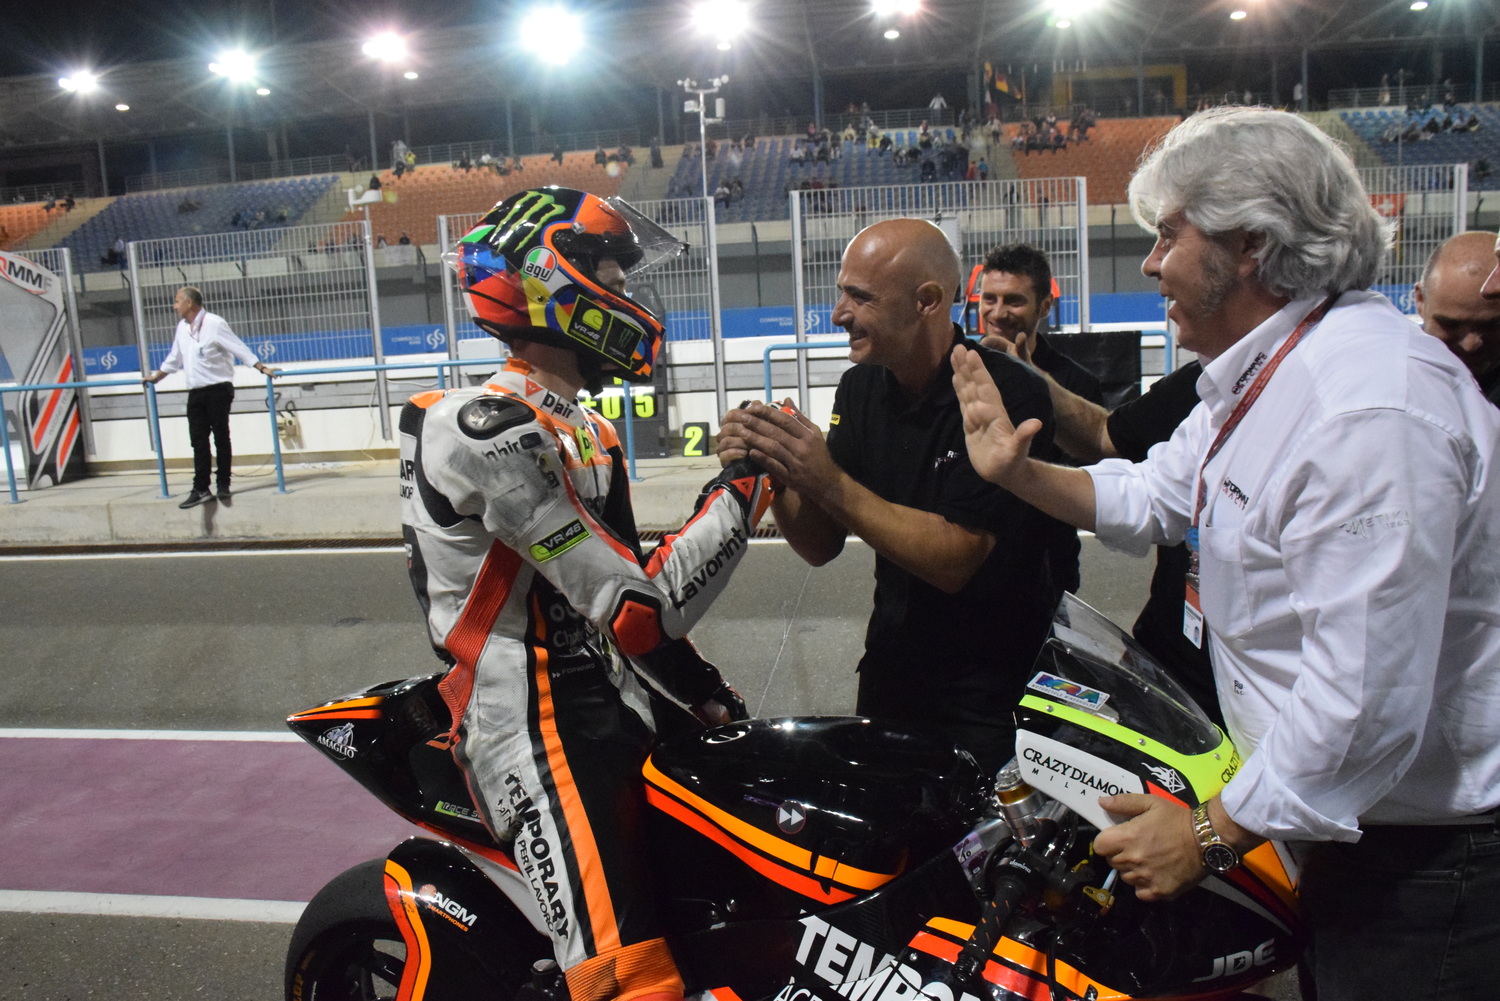 Luca Marini tenth after a superb debut